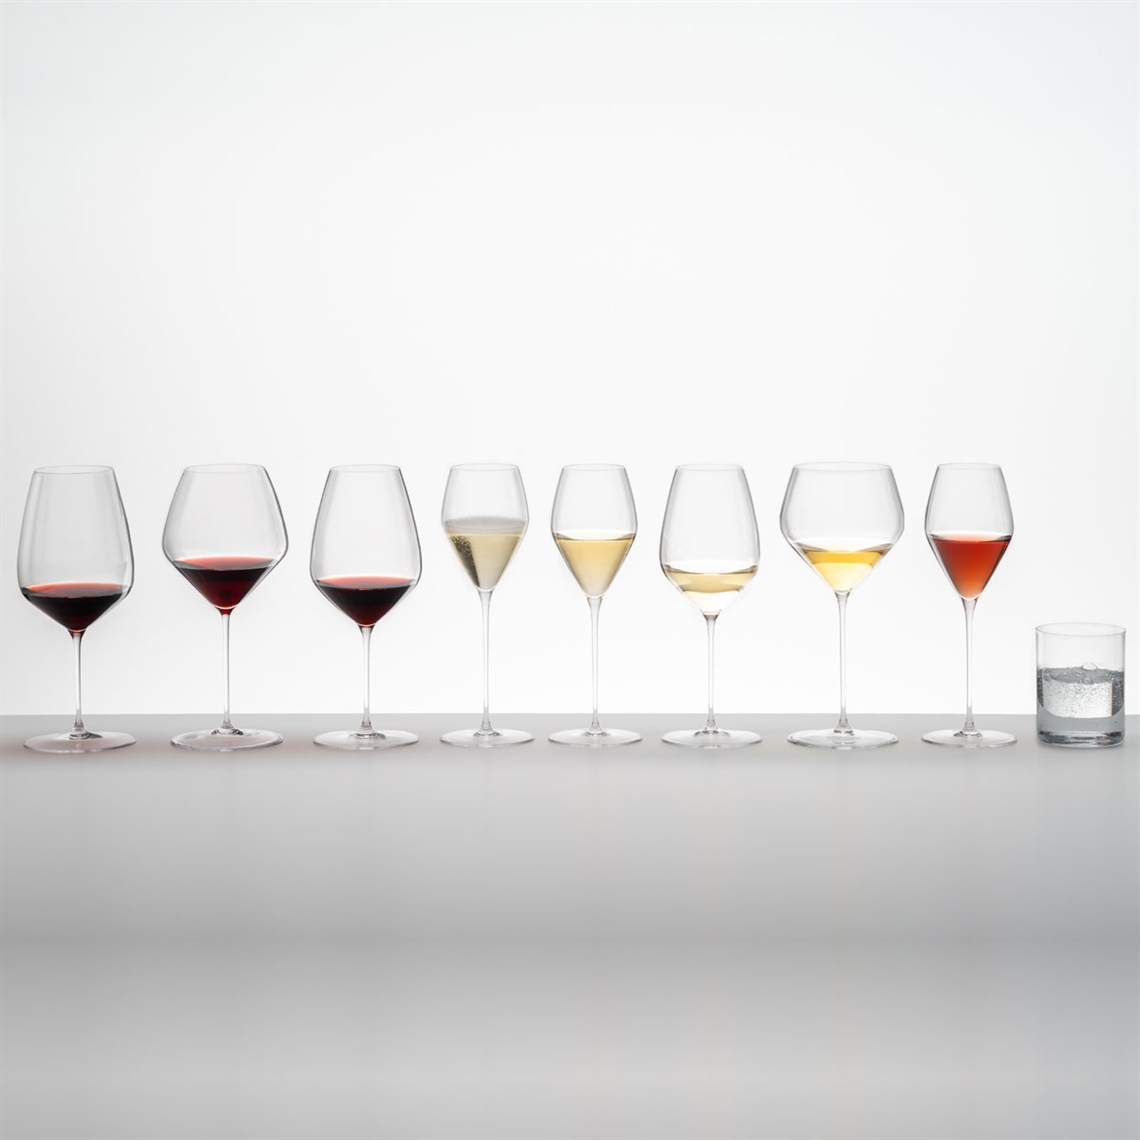 View our collection of Riedel Veloce How to Clean Riedel Glasses